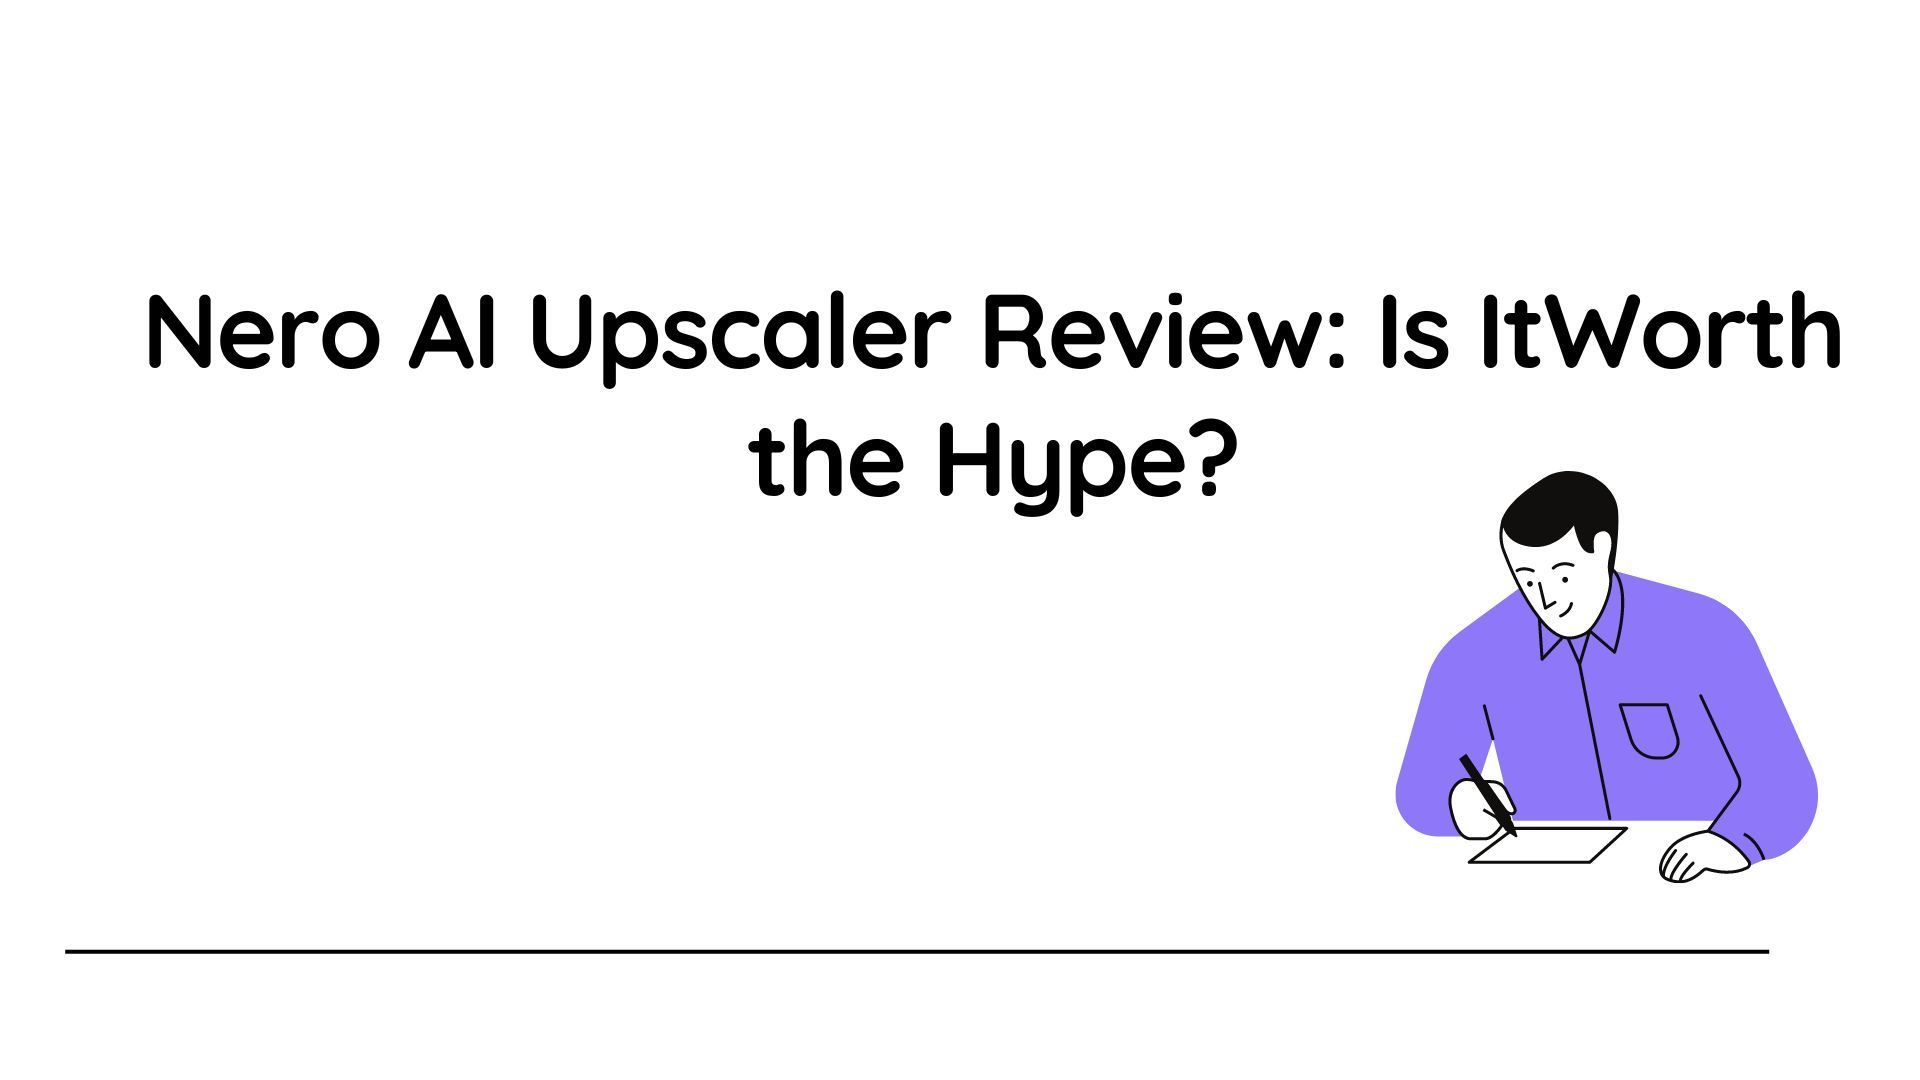 Nero AI Upscaler Review: Is It Worth the Hype?